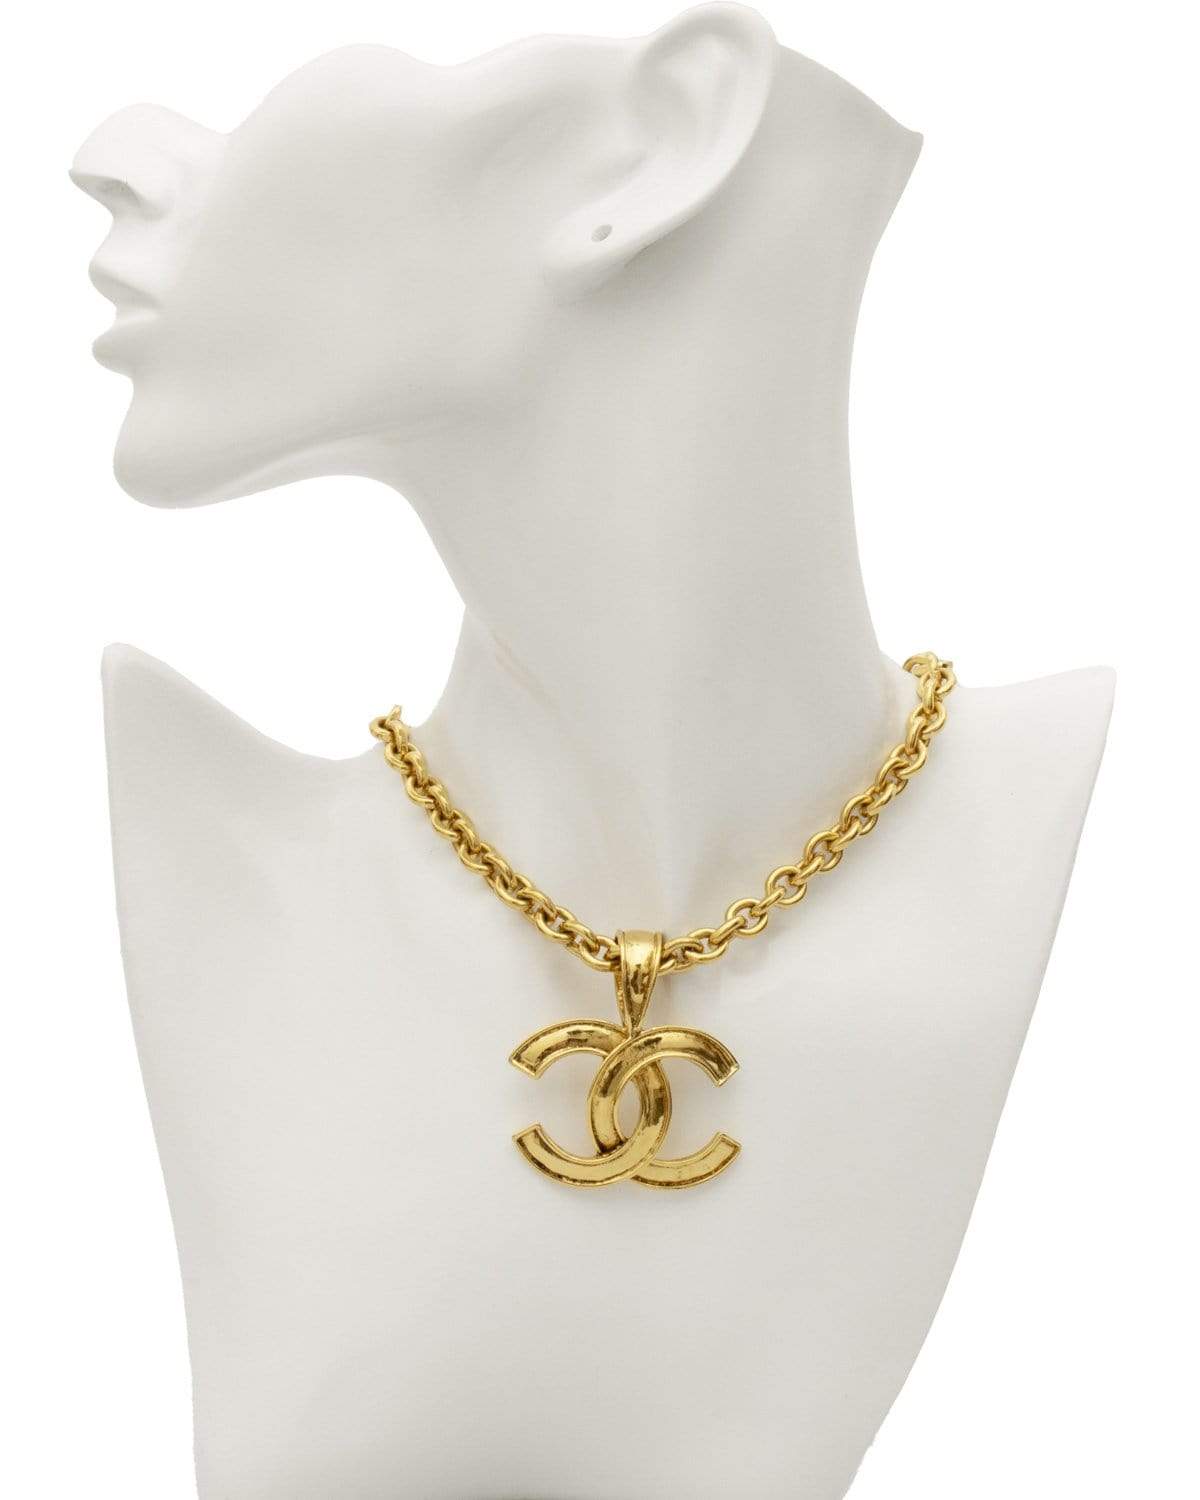 Chanel Vintage CHANEL gold chain necklace with large CC mark logo pendant top - AWC1094